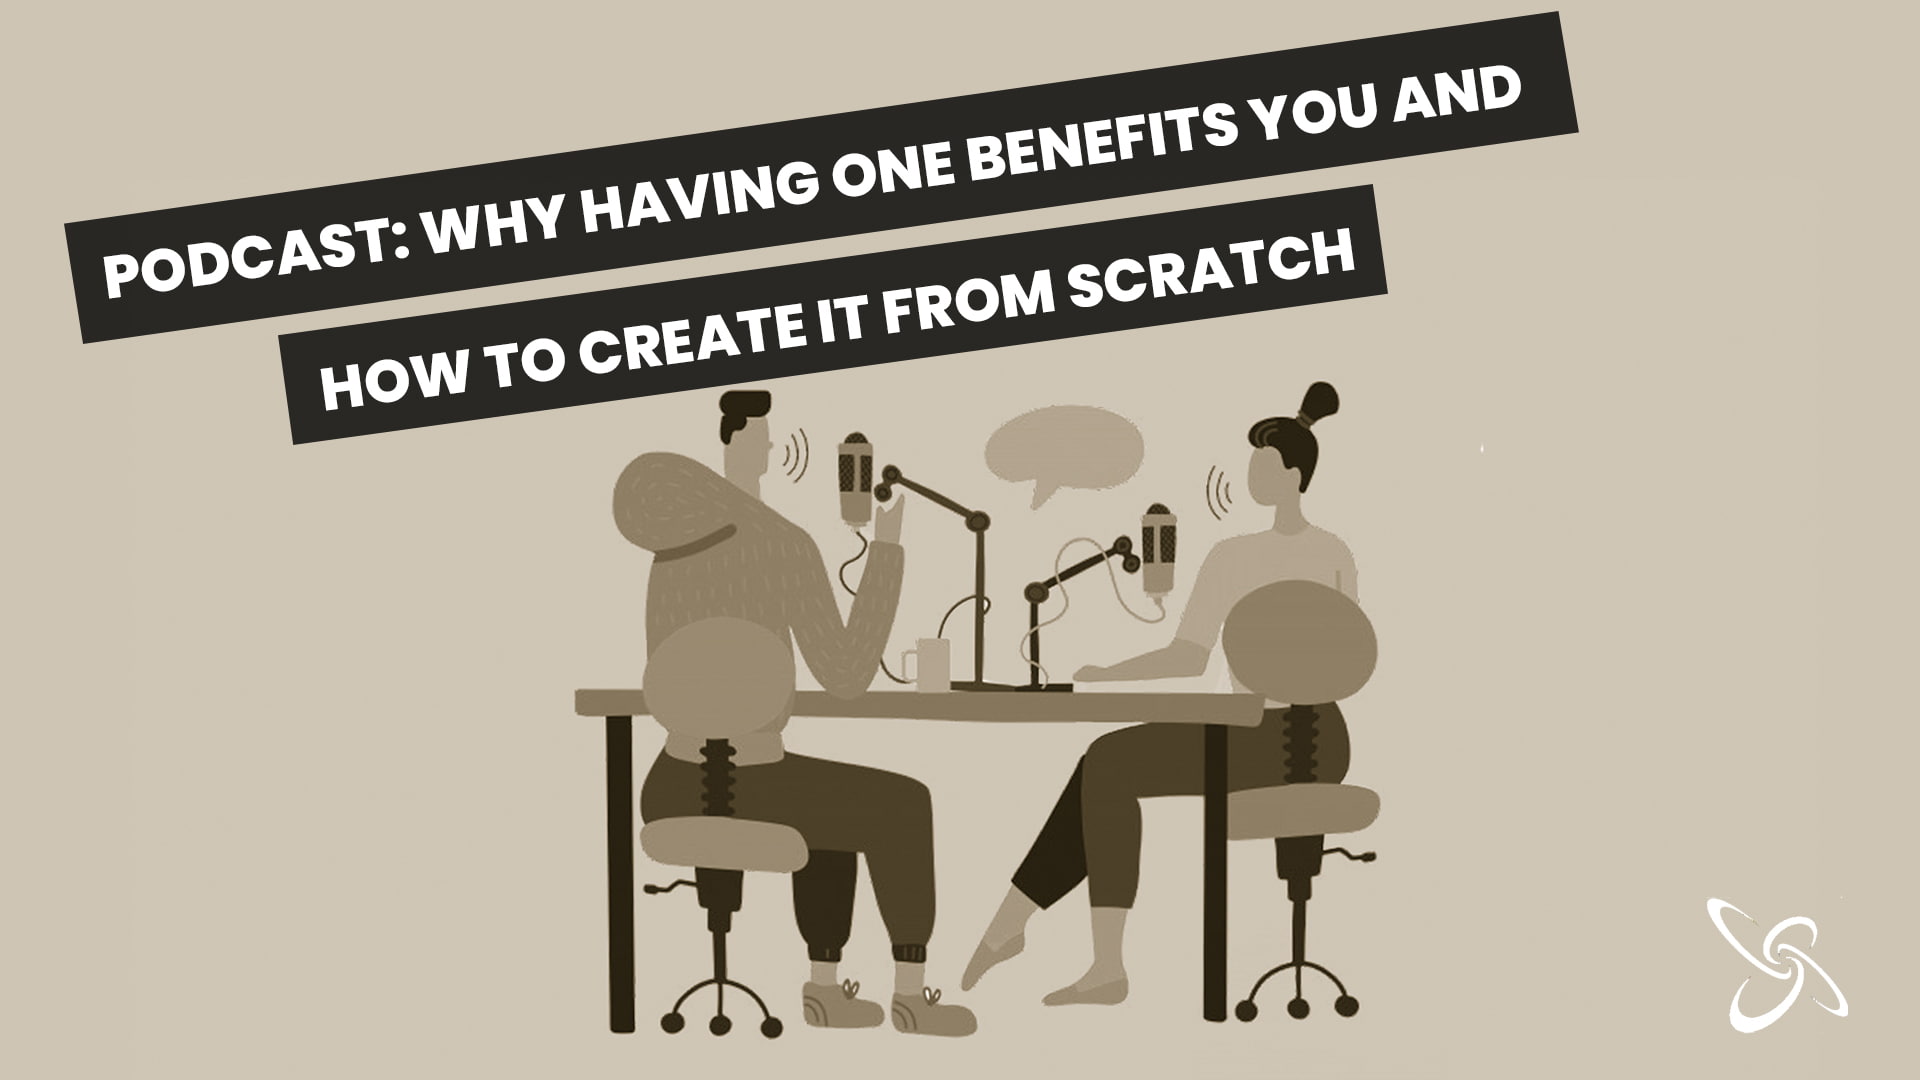 Podcast: Why having one benefits you